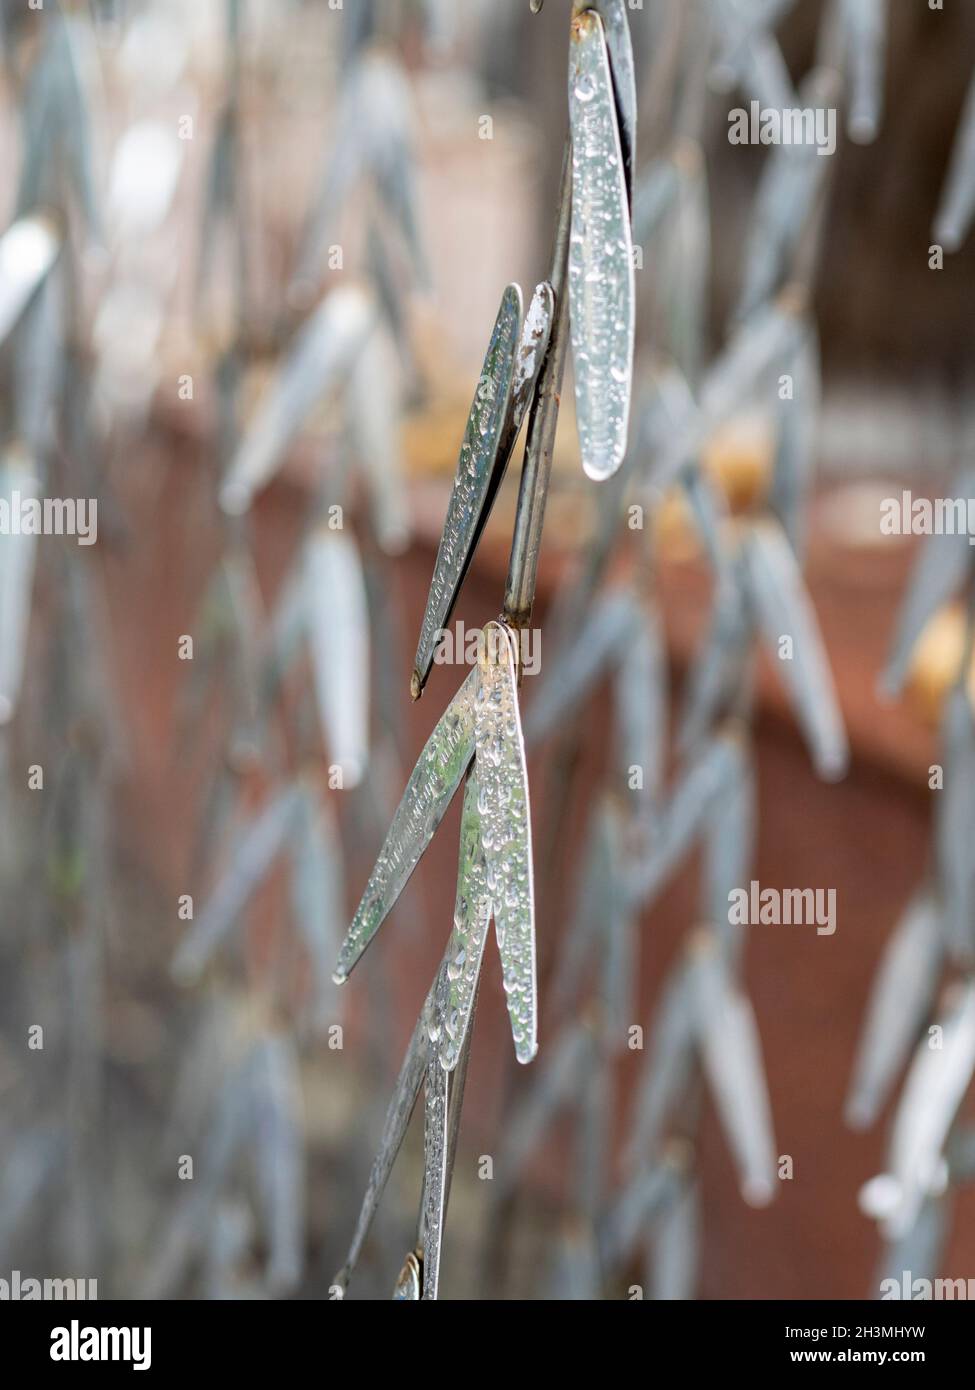 Names embossed into the metal leaves of the Holocaust Memorial Tree in the rain: Victims of the Holocaust are named on the metal leaves of the weeping Holocaust memorial Tree at the Great Synagogue in Budapest. Rain drips like tears. Stock Photo